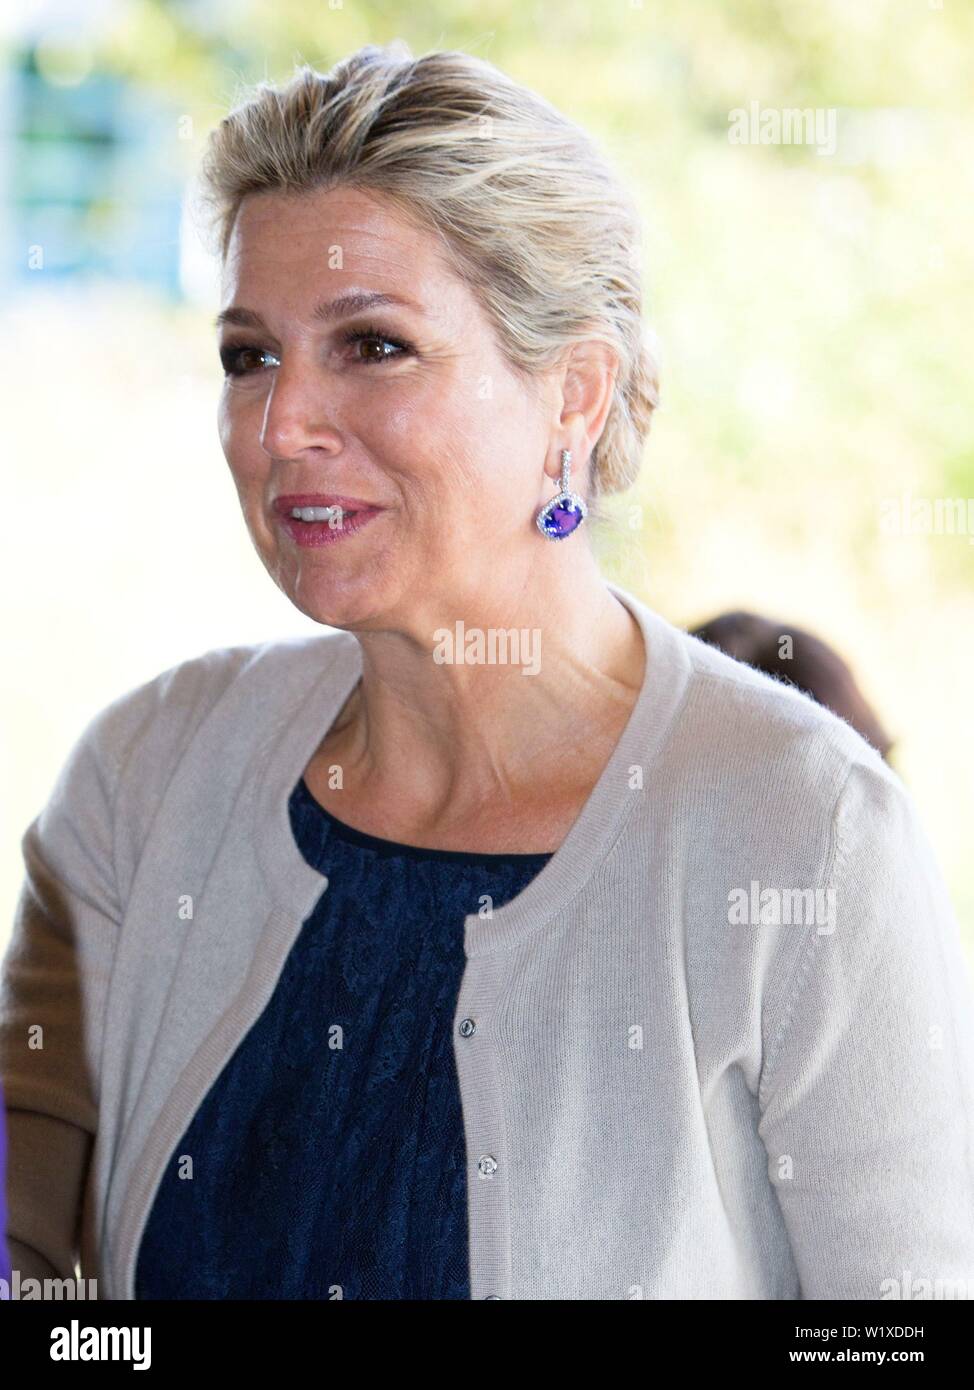 Queen Maxima of The Netherlands arrives at the World Forum in The Hague, on July 04, 2019, to give a short opening speech at the 26th Egmont Group of Financial Intelligence Units Plenary MeetingPhoto: Albert Ph van der Werf /  Netherlands OUT / Point de Vue OUT | Stock Photo